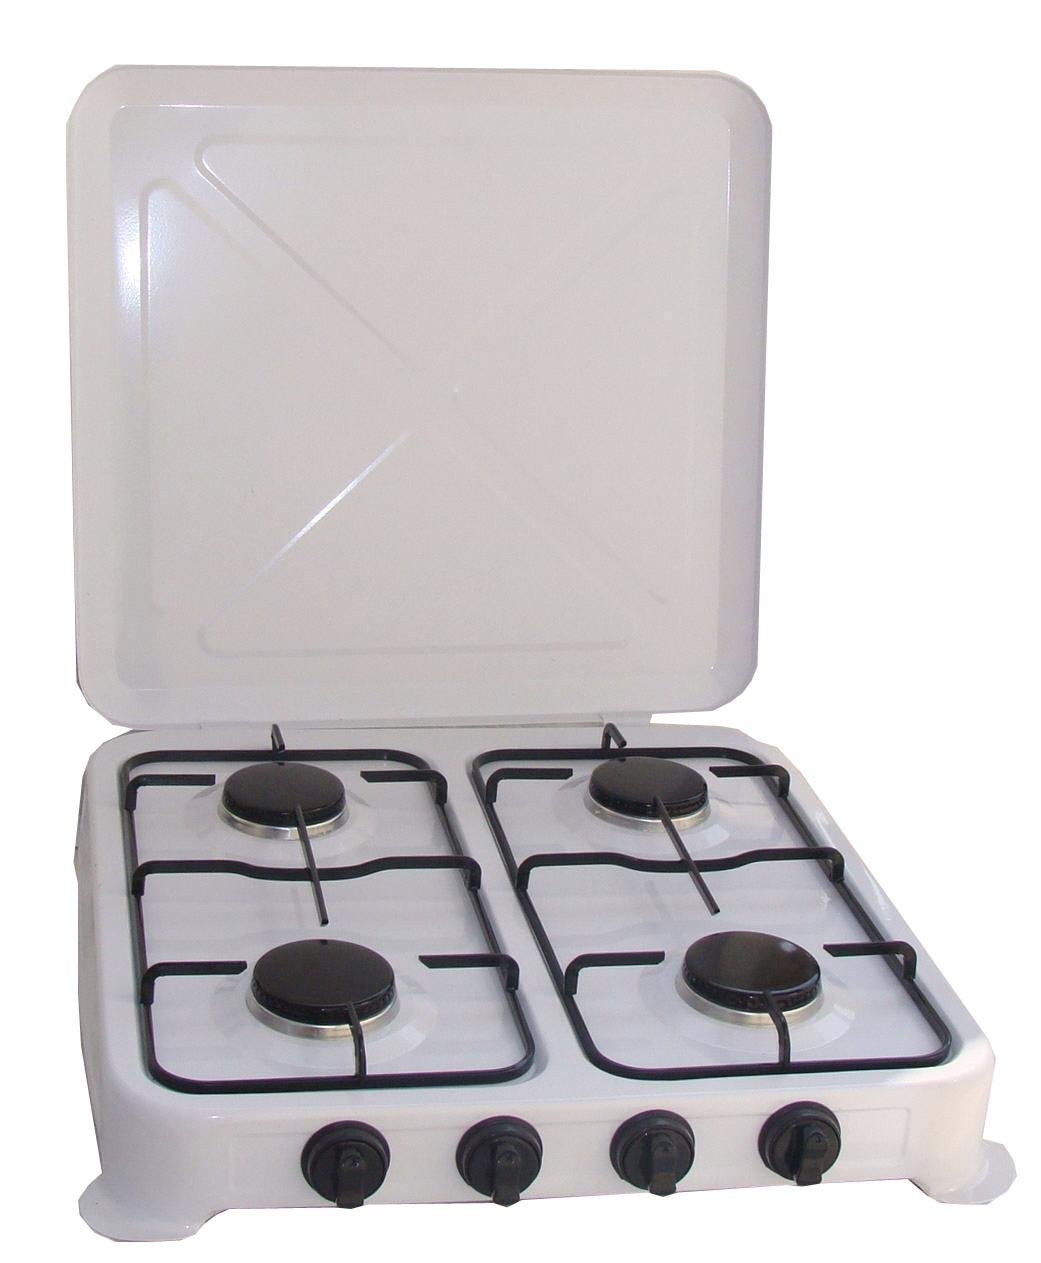 4 burners gas stove with CE certification